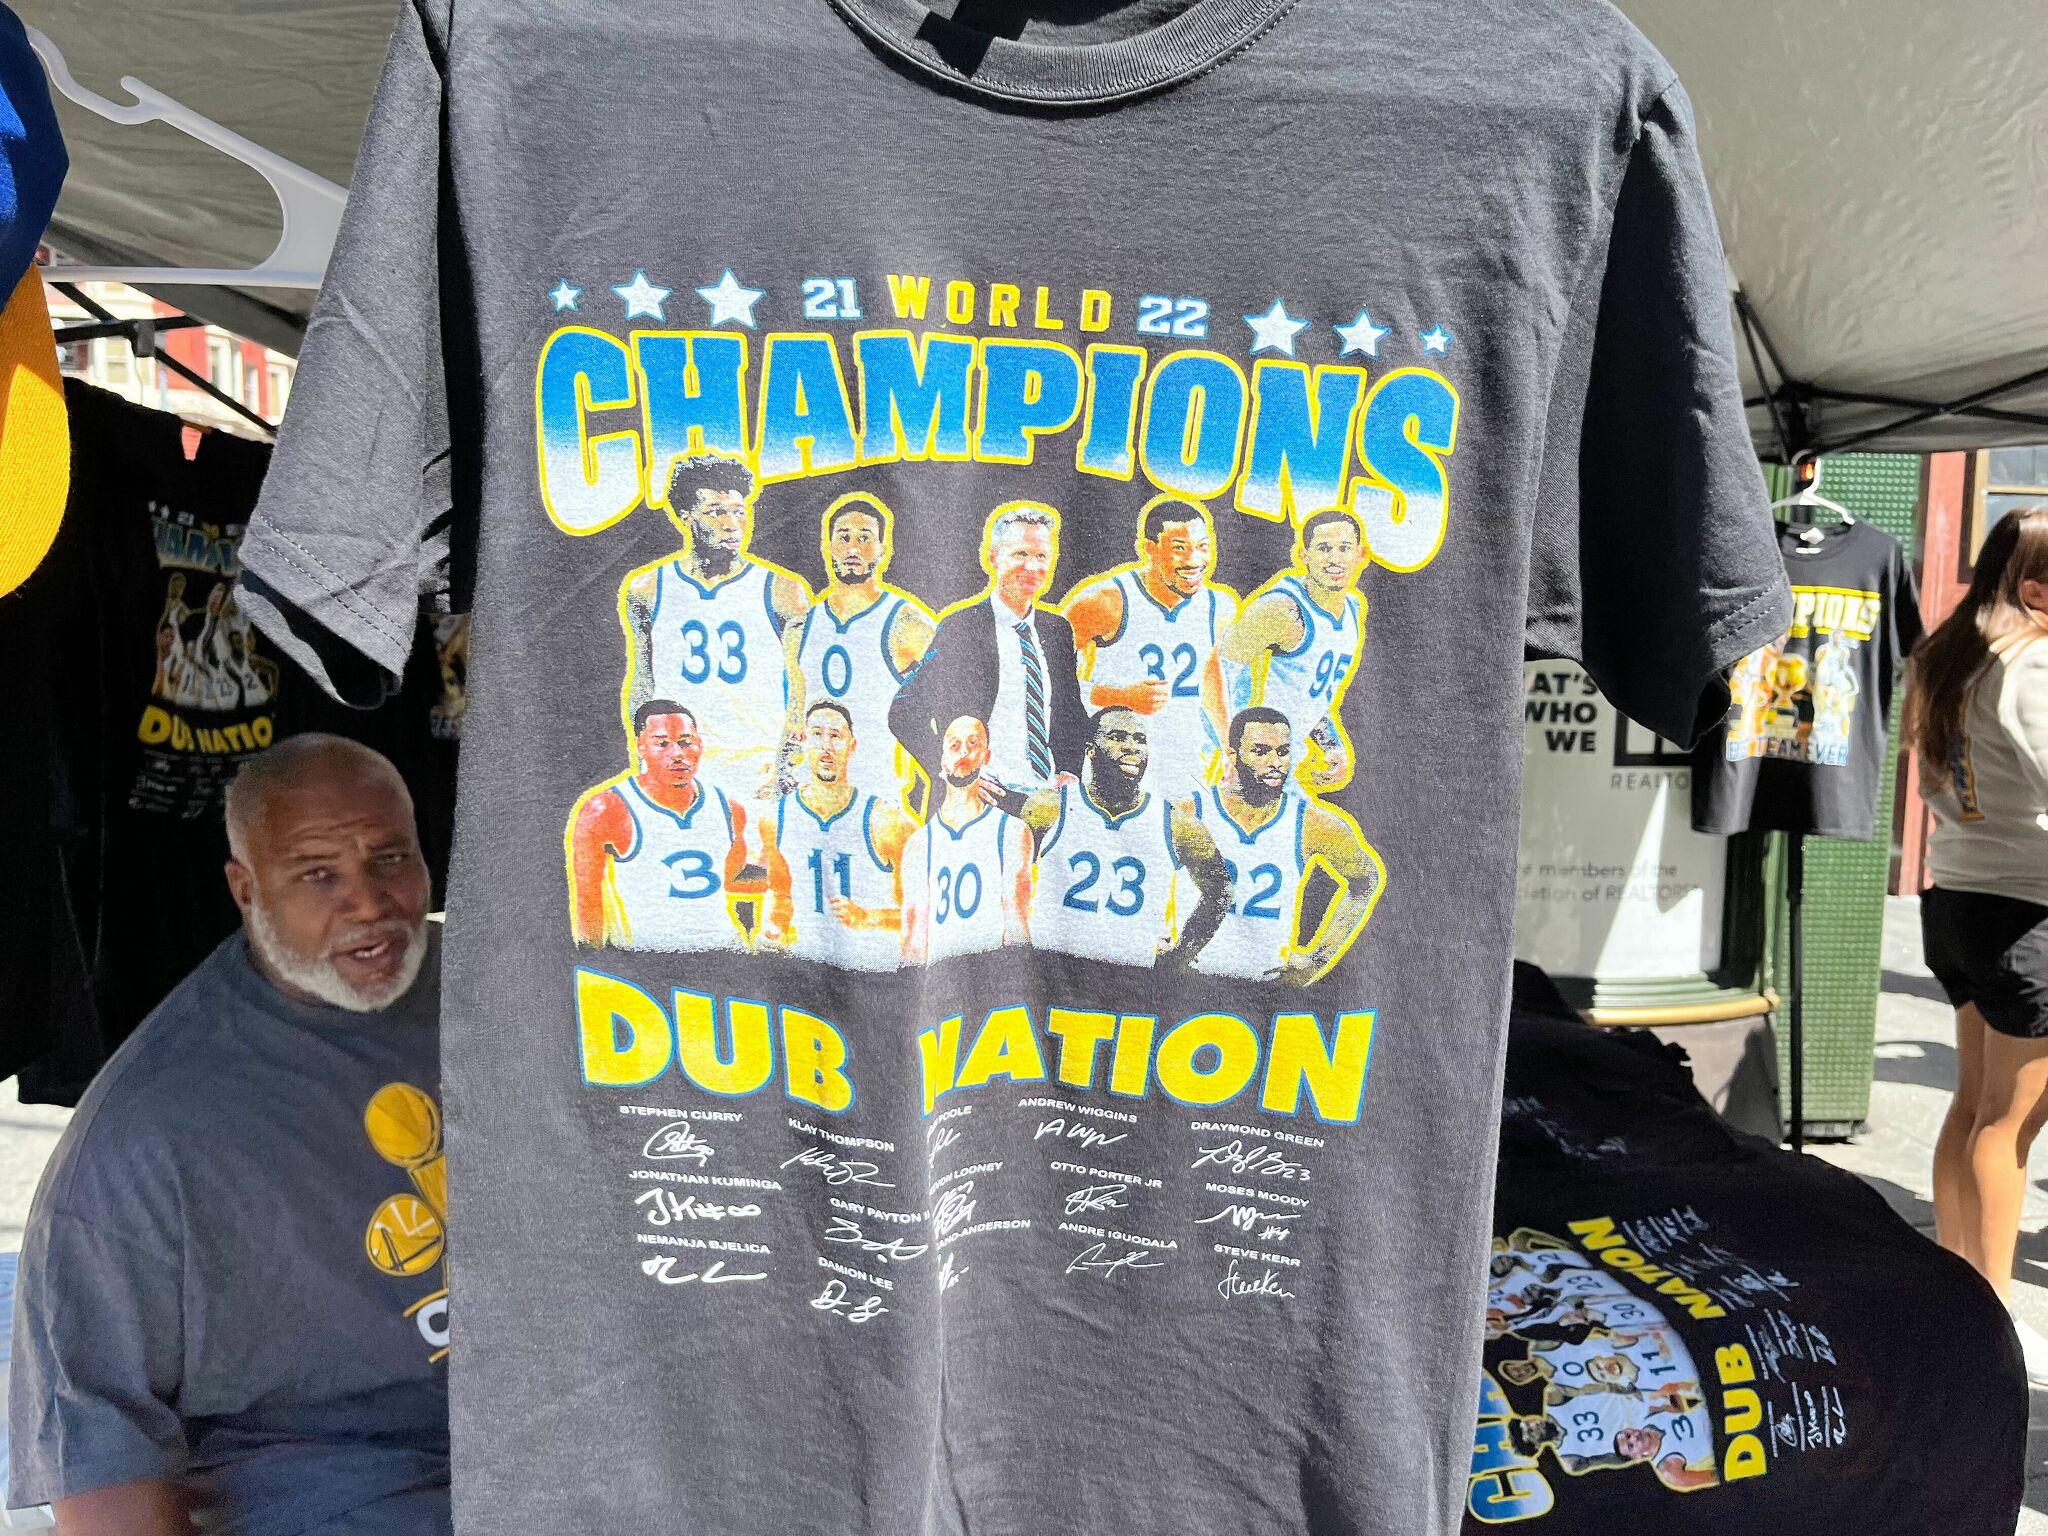 Warriors championship gear is already available at the airport in